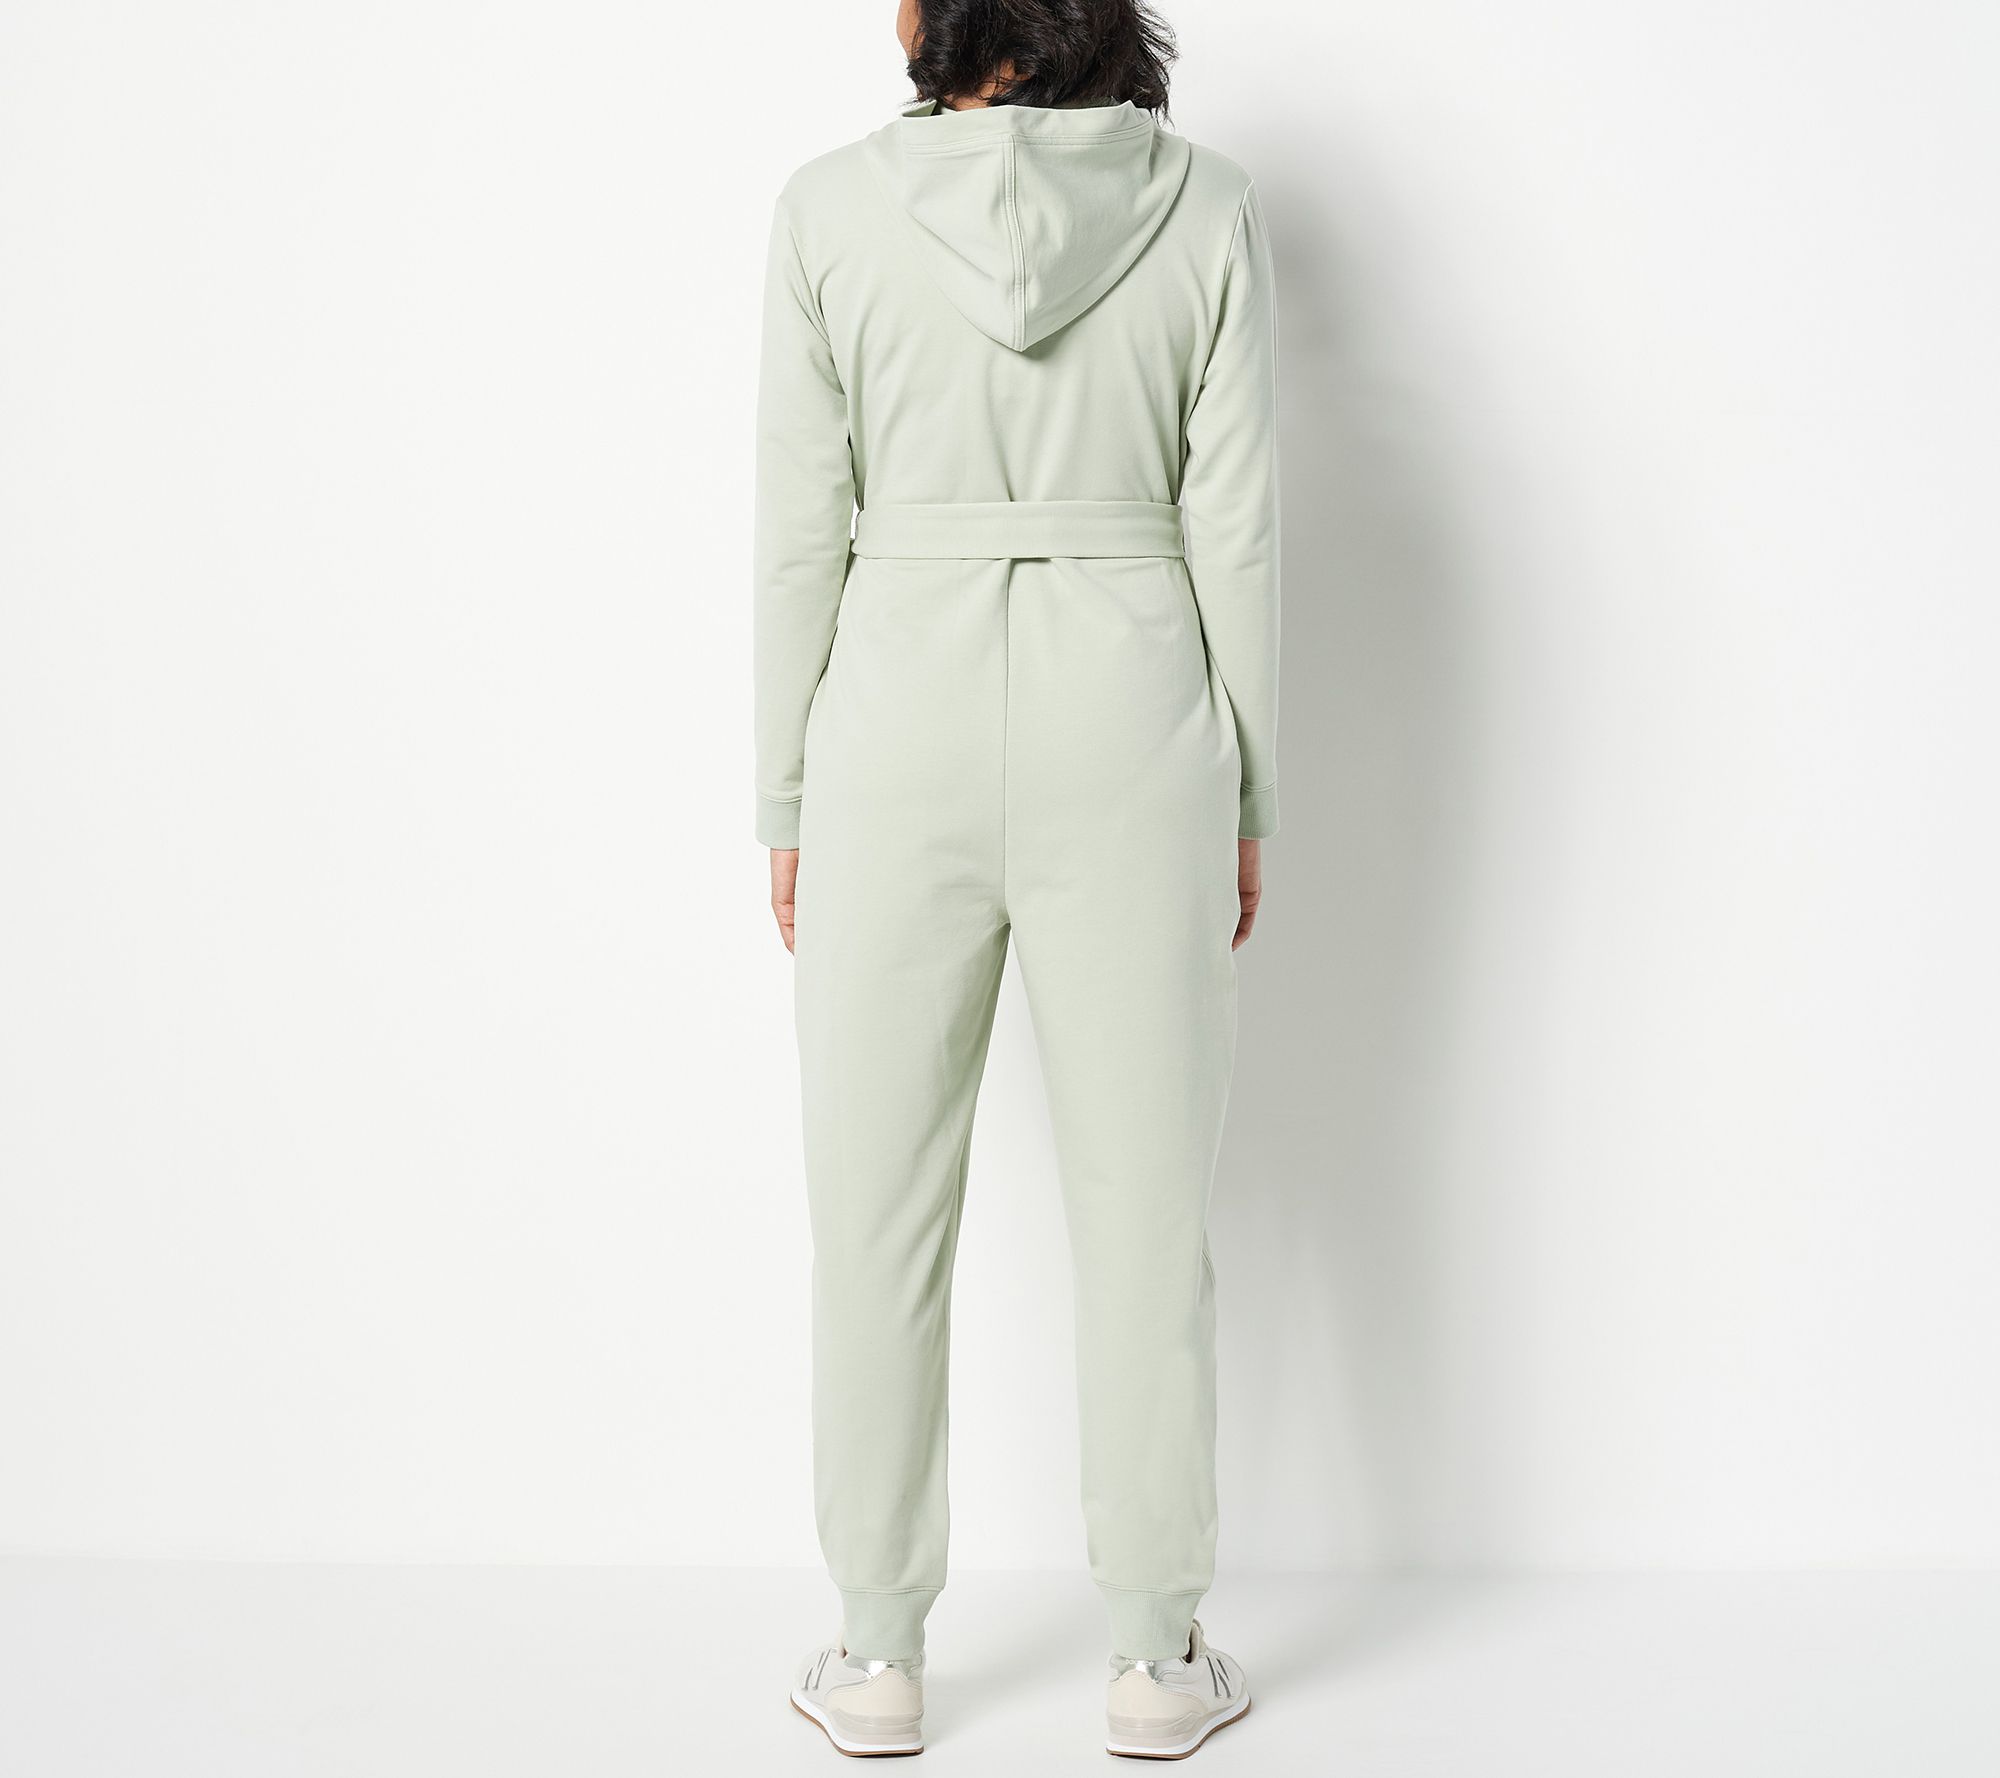 Encore by Idina Menzel Regular Soft French Terry Hooded Jumpsuit - QVC.com